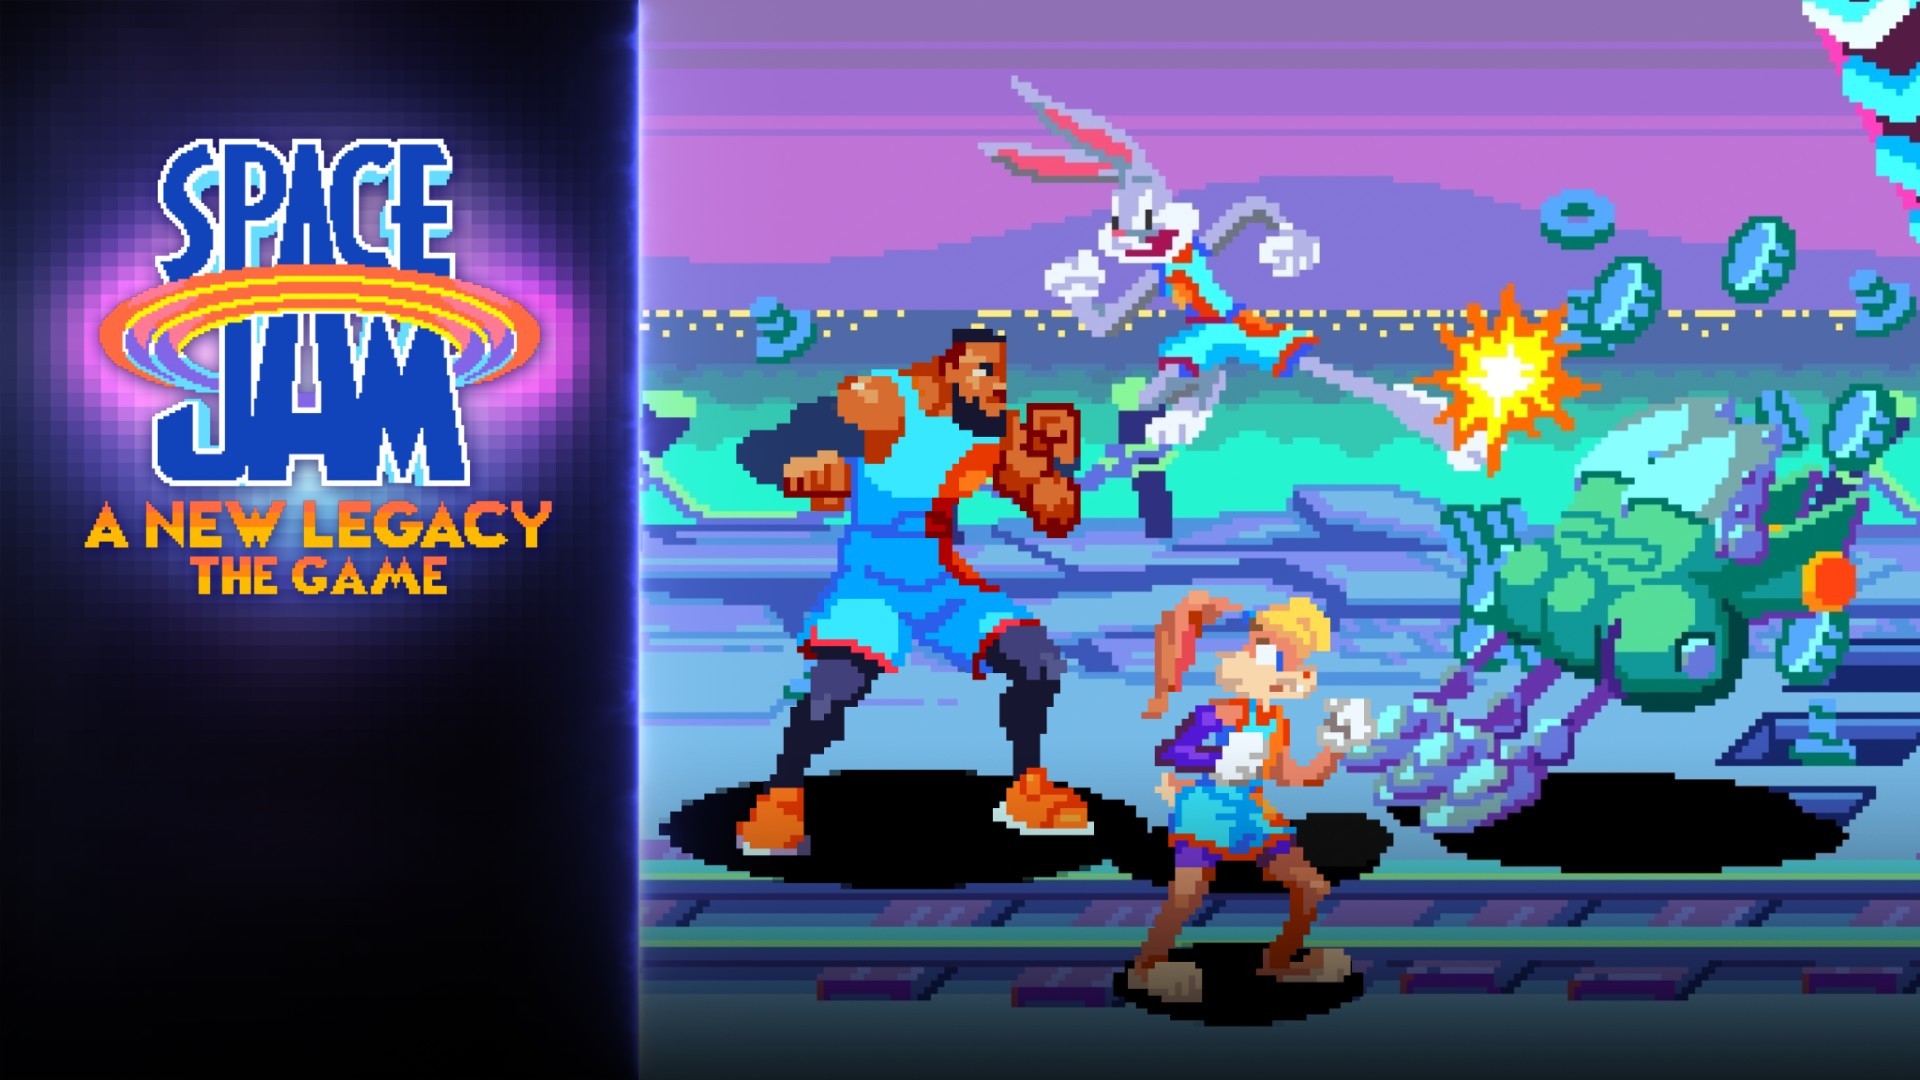 Introducing Space Jam: A New Legacy - The Game and Three Exclusive